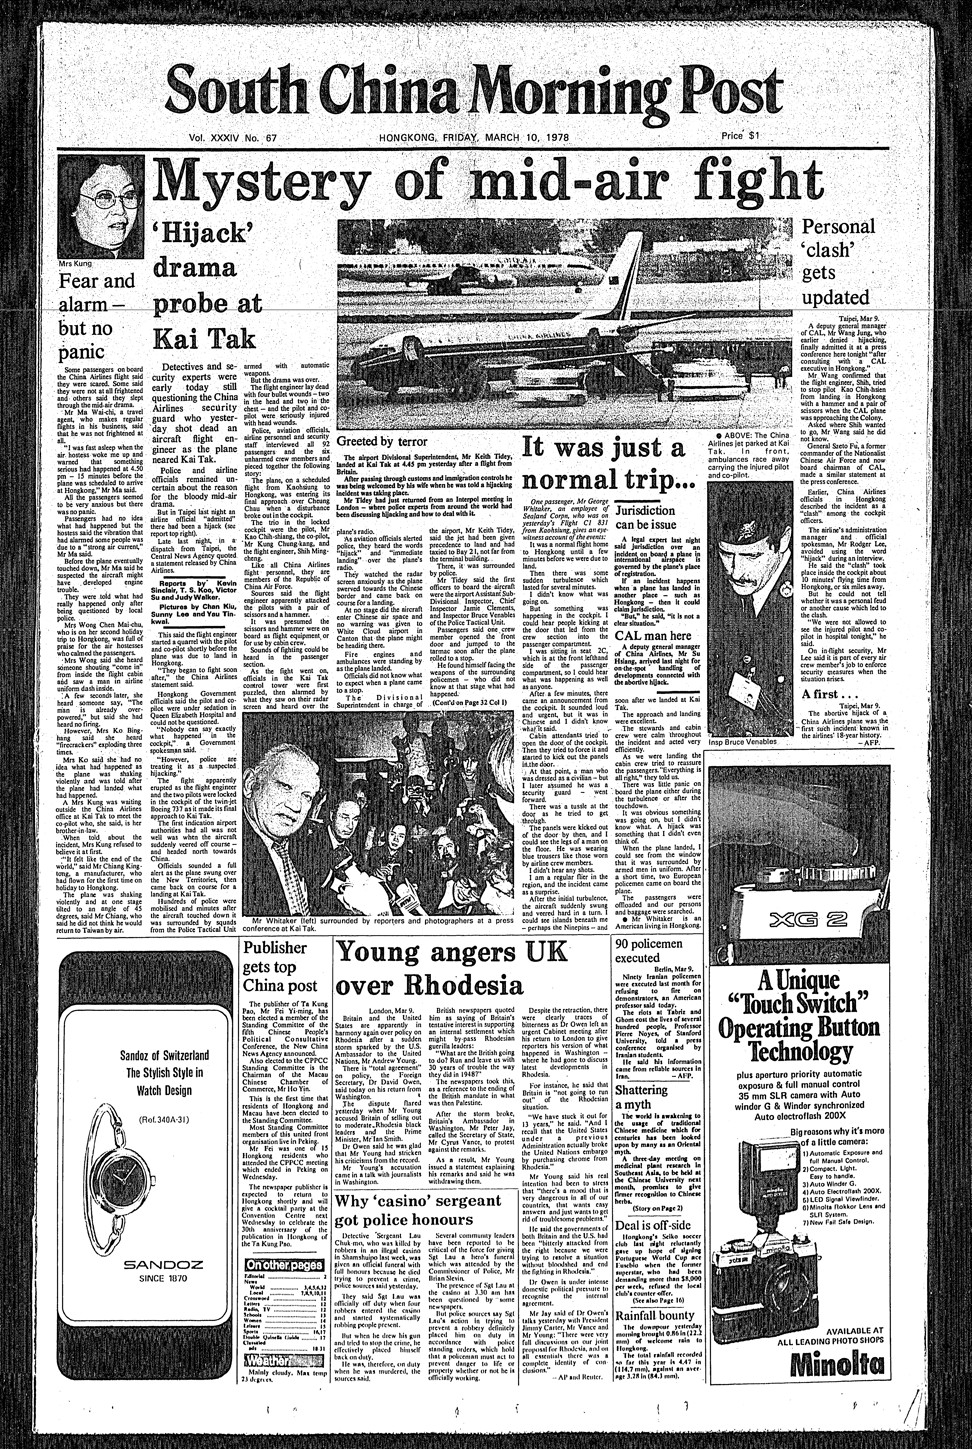 The front page of the South China Morning Post on March 10, 1978.